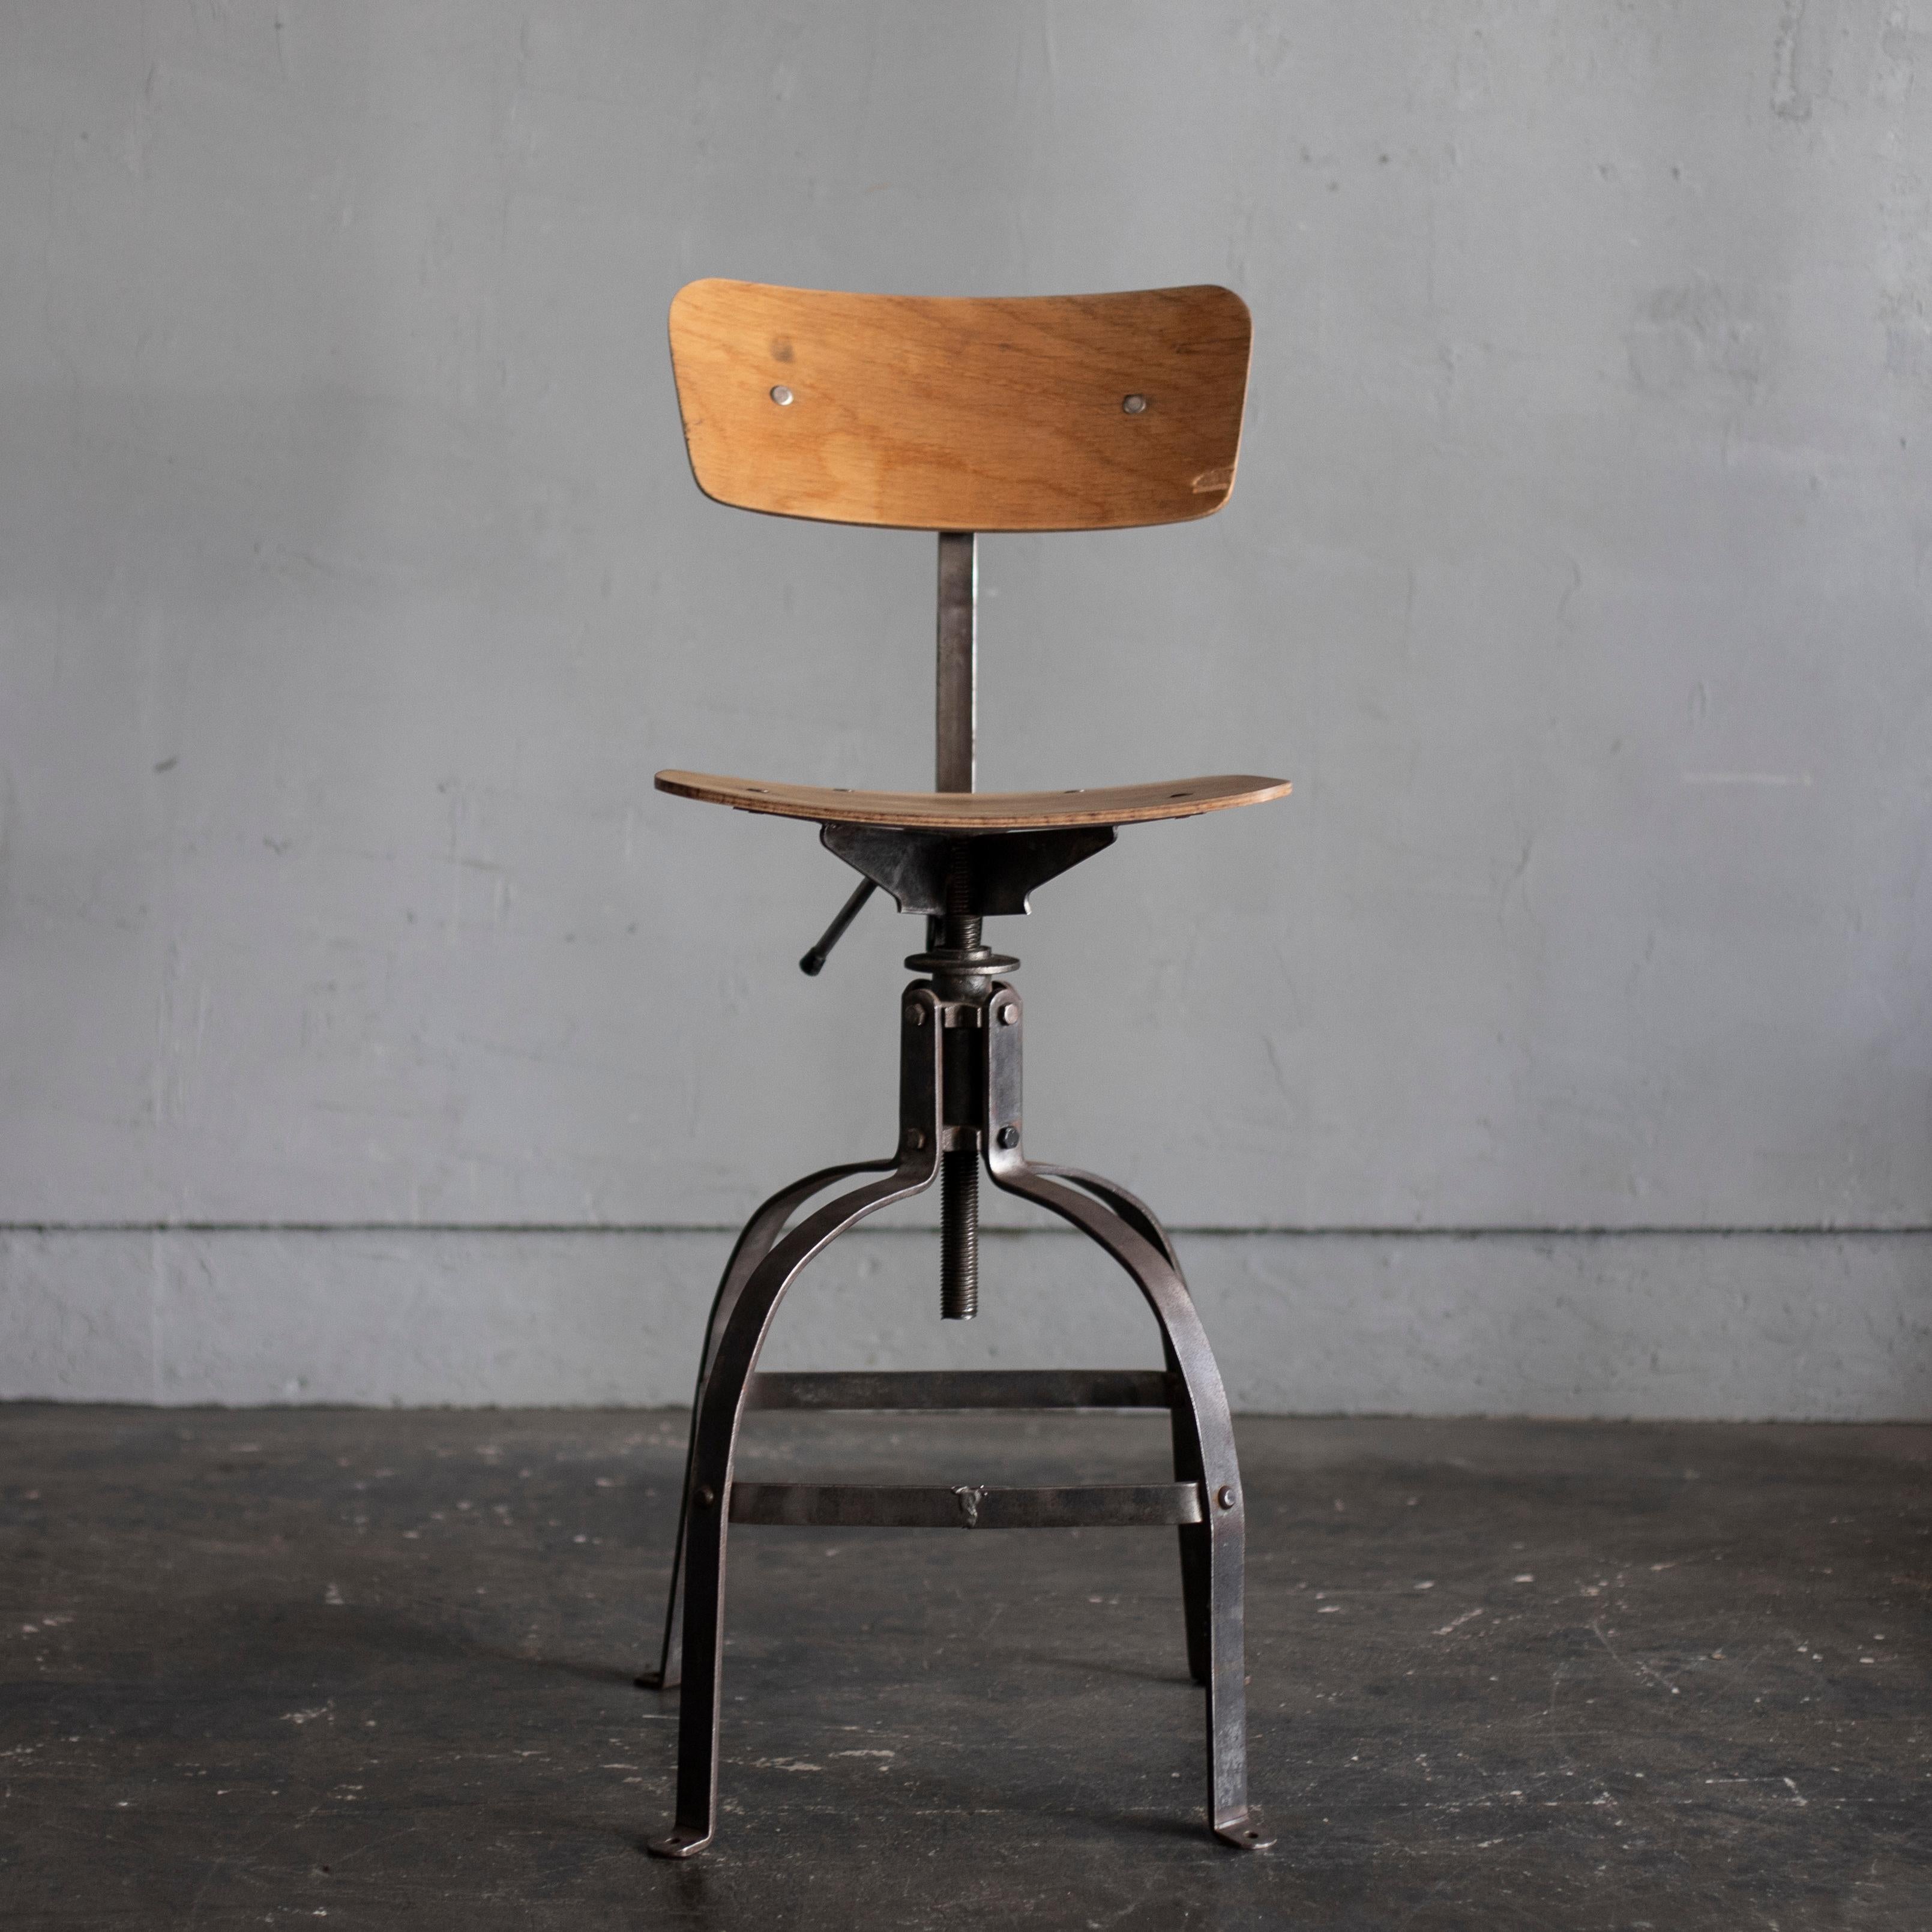 French Bienaise chair in metal and wood.
The seat and the back are adjustable in height.
Measures: H 90-110cm, SH 61-73cm.